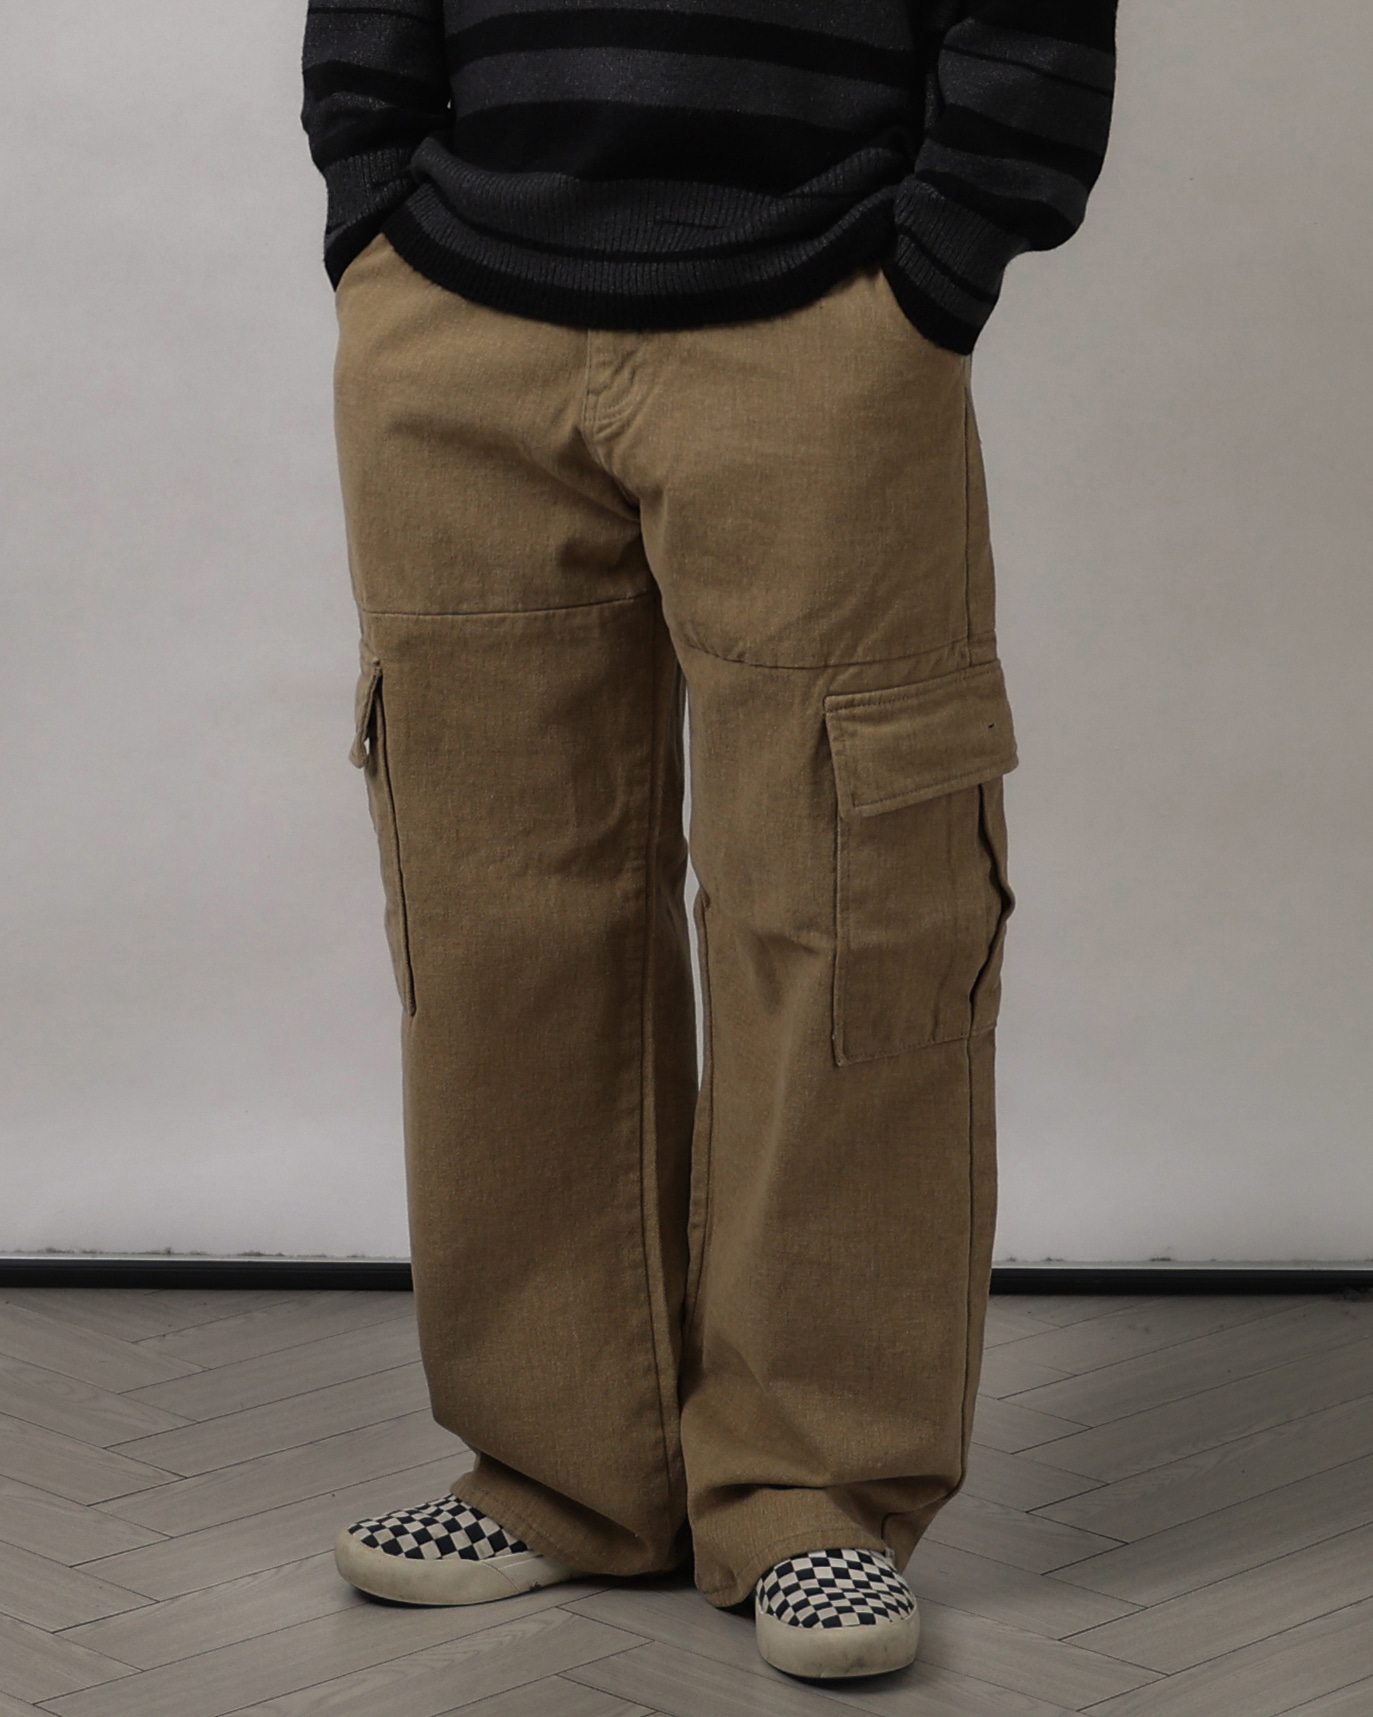 CLV 505 Peach Brushed Cargo Pants (Blue Gray/Beige)